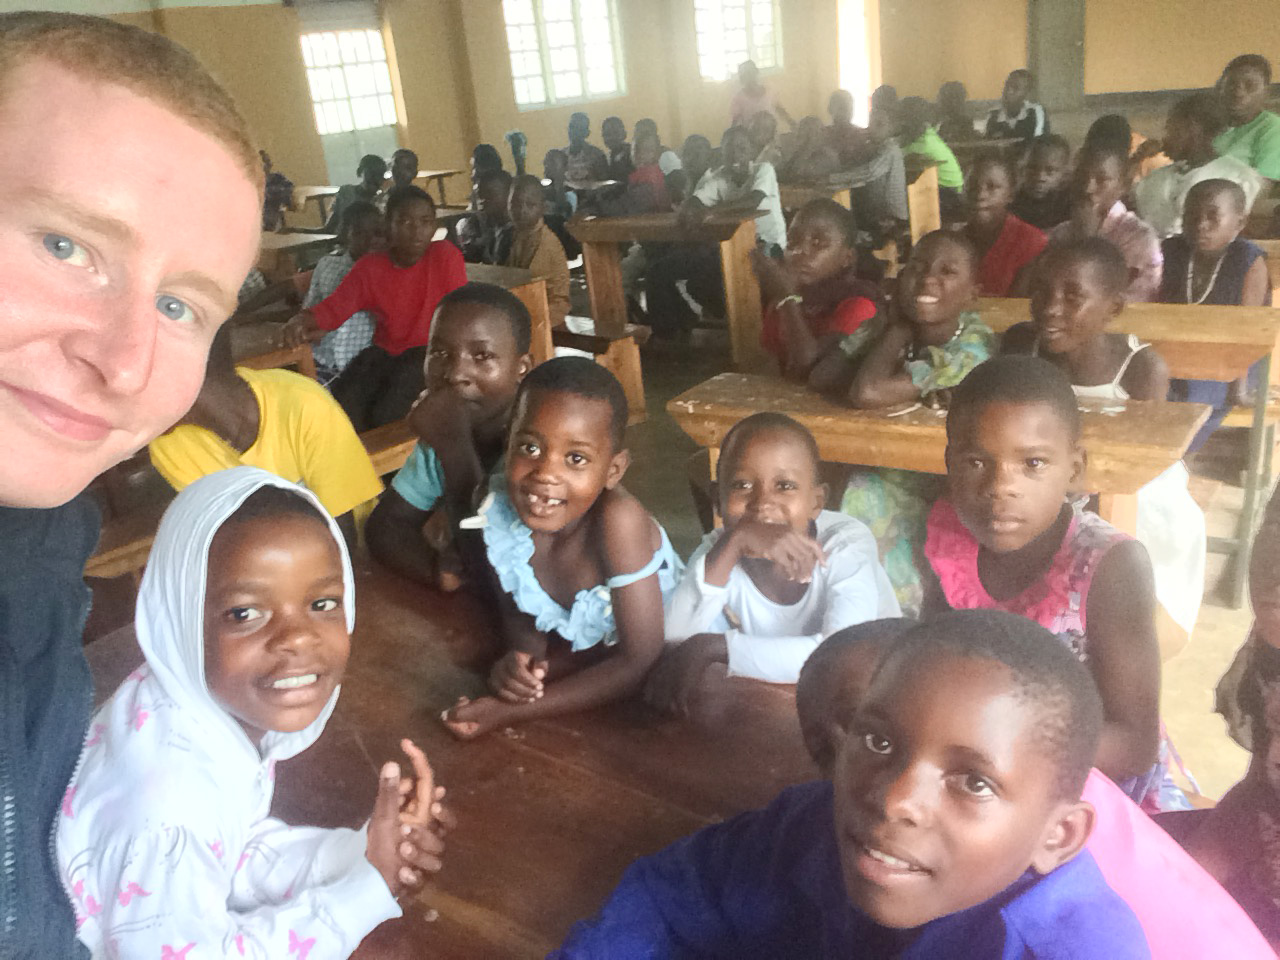 Colin Keenan in the classroom – he’s hoping to fund a year’s education at Martyrs for seven children